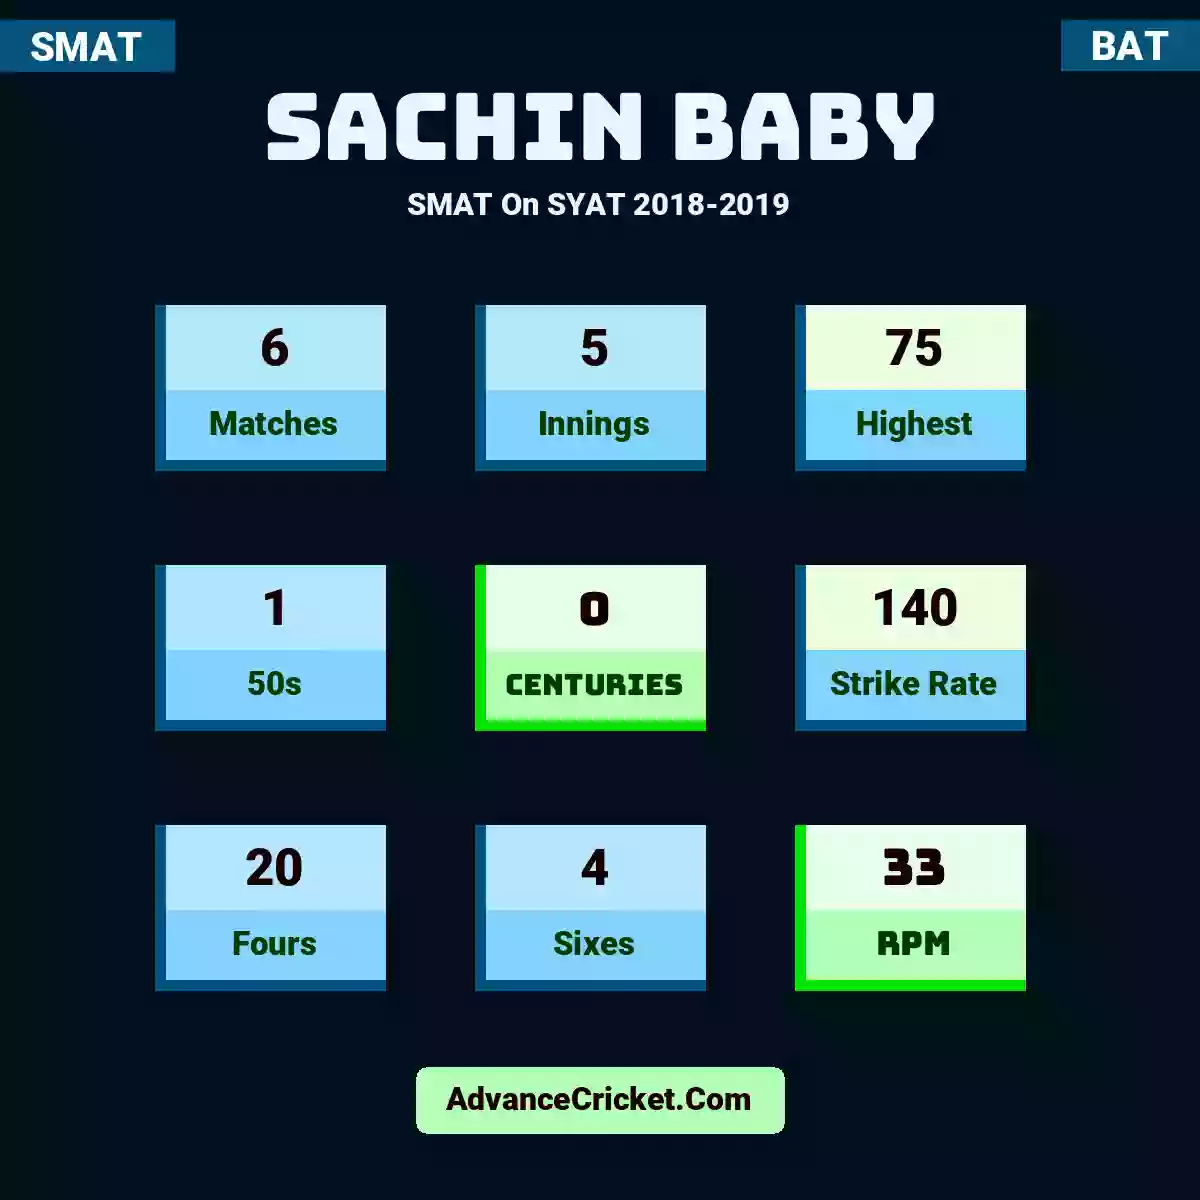 Sachin Baby SMAT  On SYAT 2018-2019, Sachin Baby played 6 matches, scored 75 runs as highest, 1 half-centuries, and 0 centuries, with a strike rate of 140. S.Baby hit 20 fours and 4 sixes, with an RPM of 33.